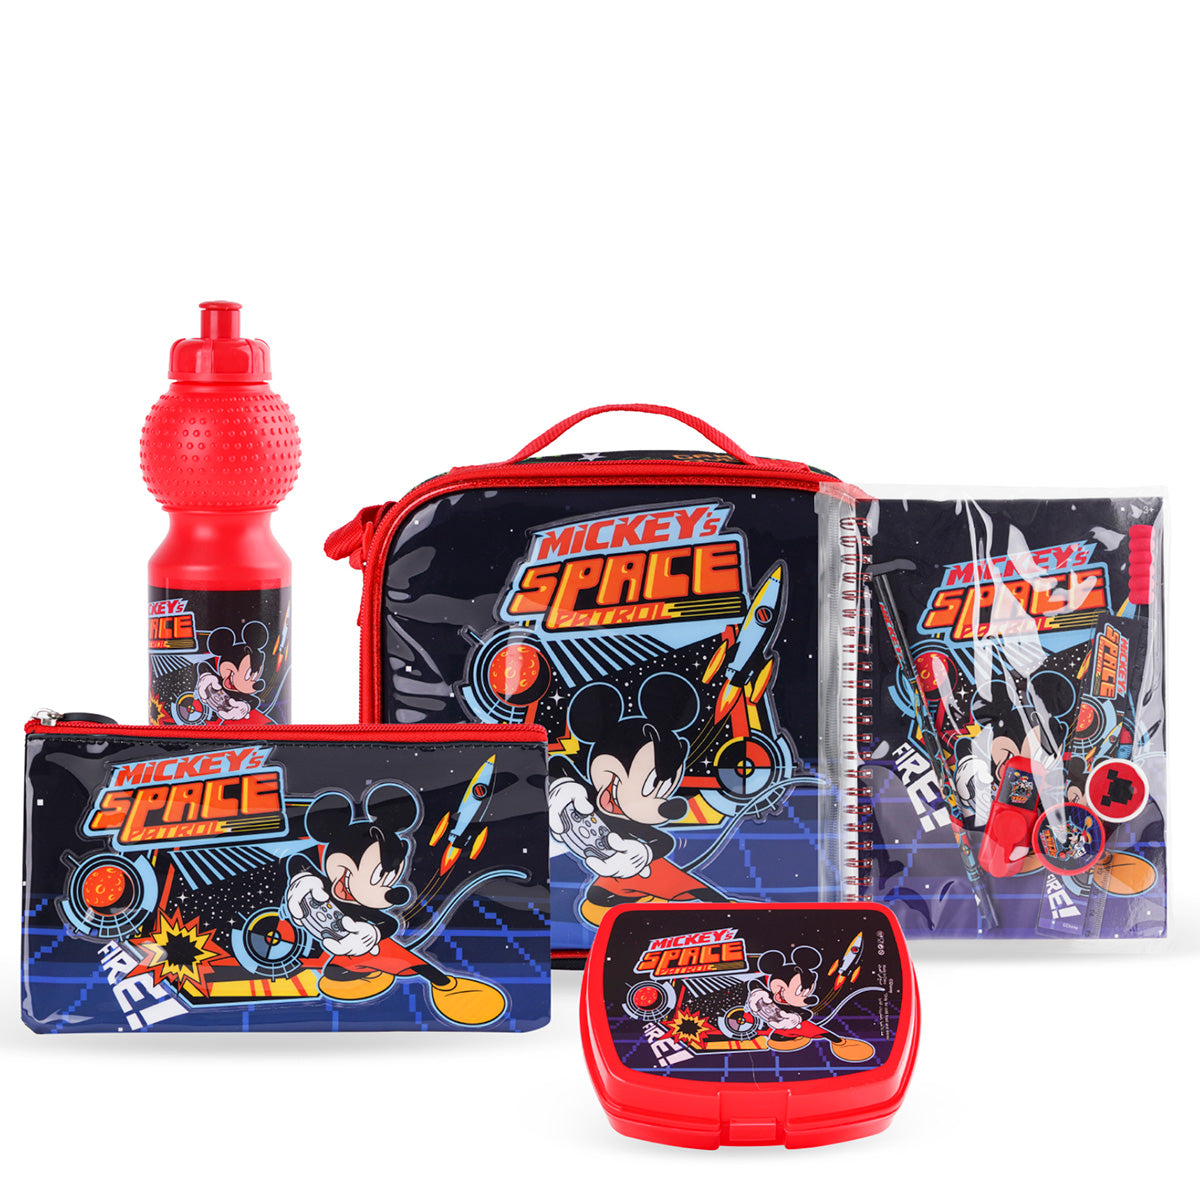 Disney Mickey Mouse Space Patrol 6in1 Box Set 18"